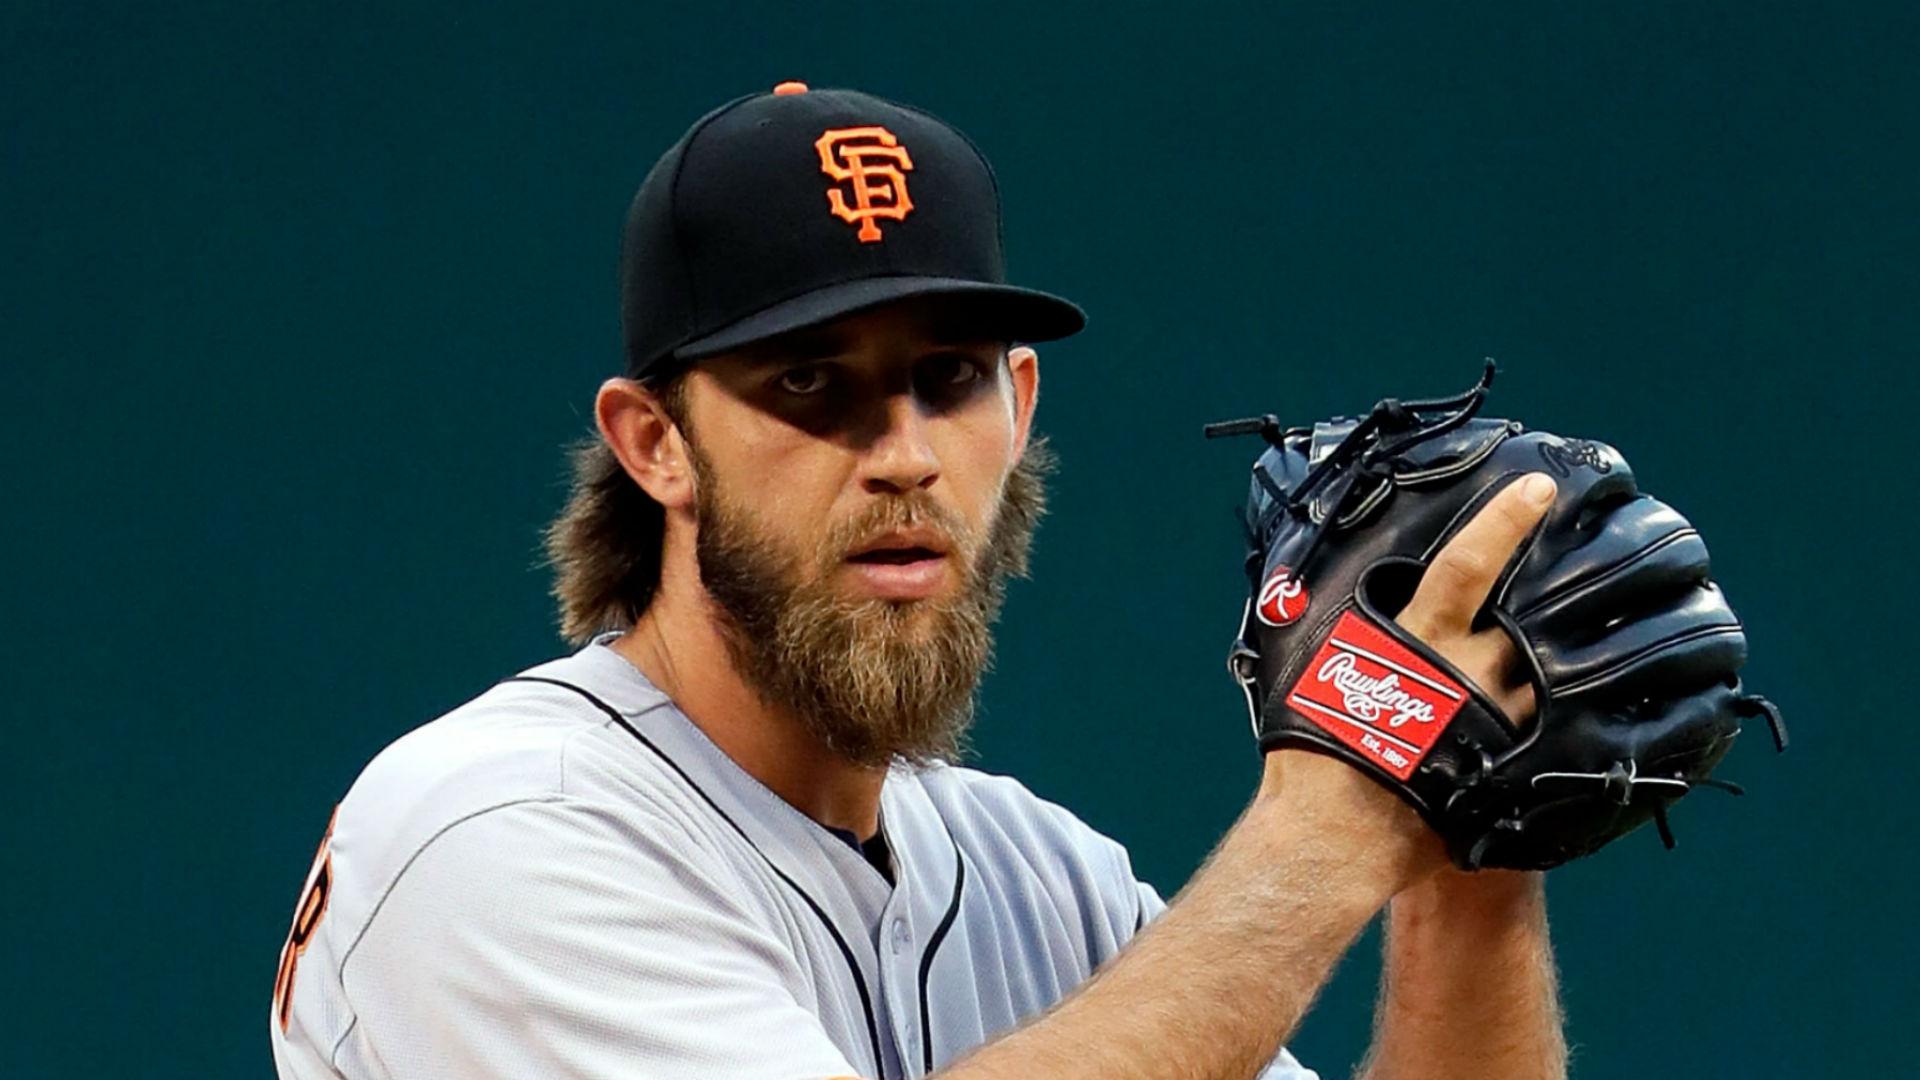 Giants' Madison Bumgarner says he'll refuse to enter game following